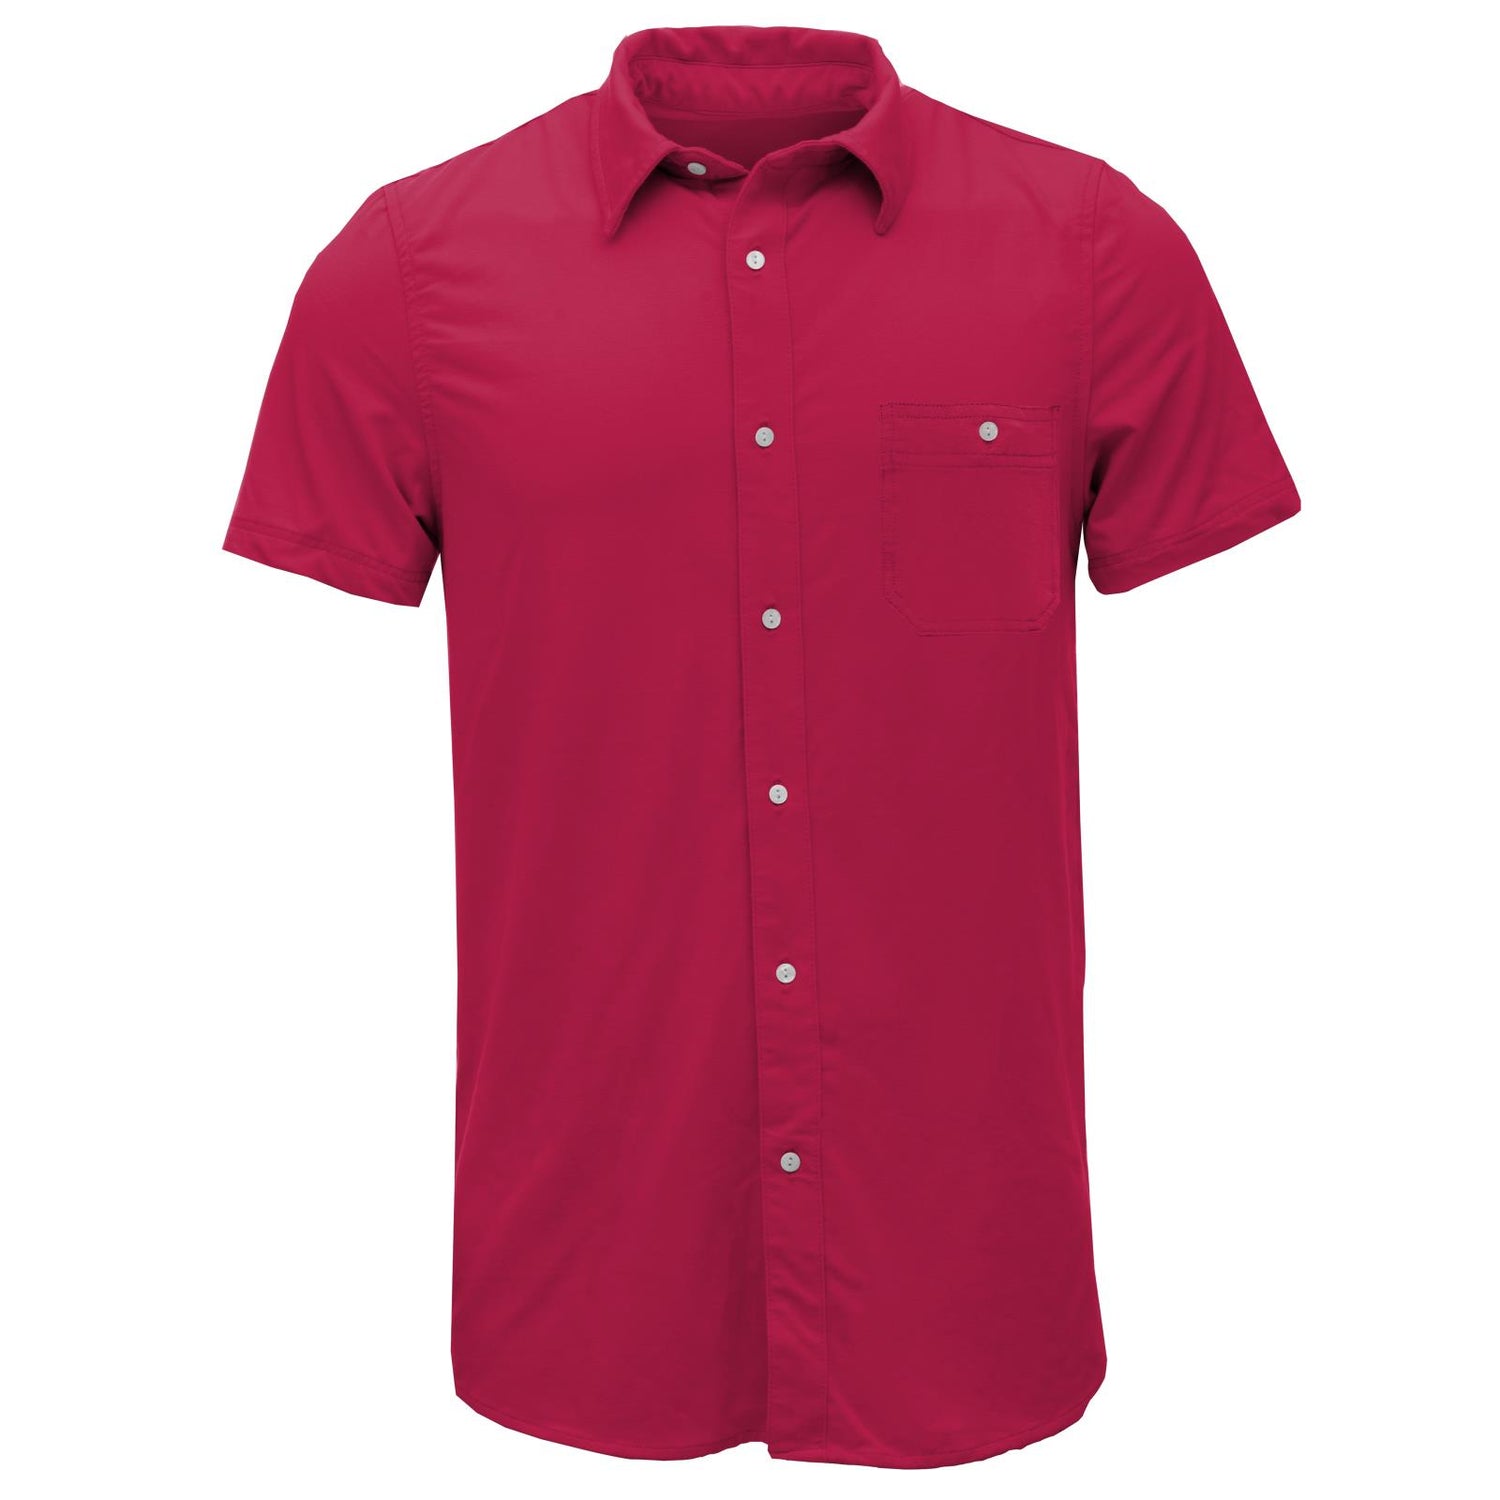 Men's Solid Short Sleeve Button Down Shirt in Flag Red